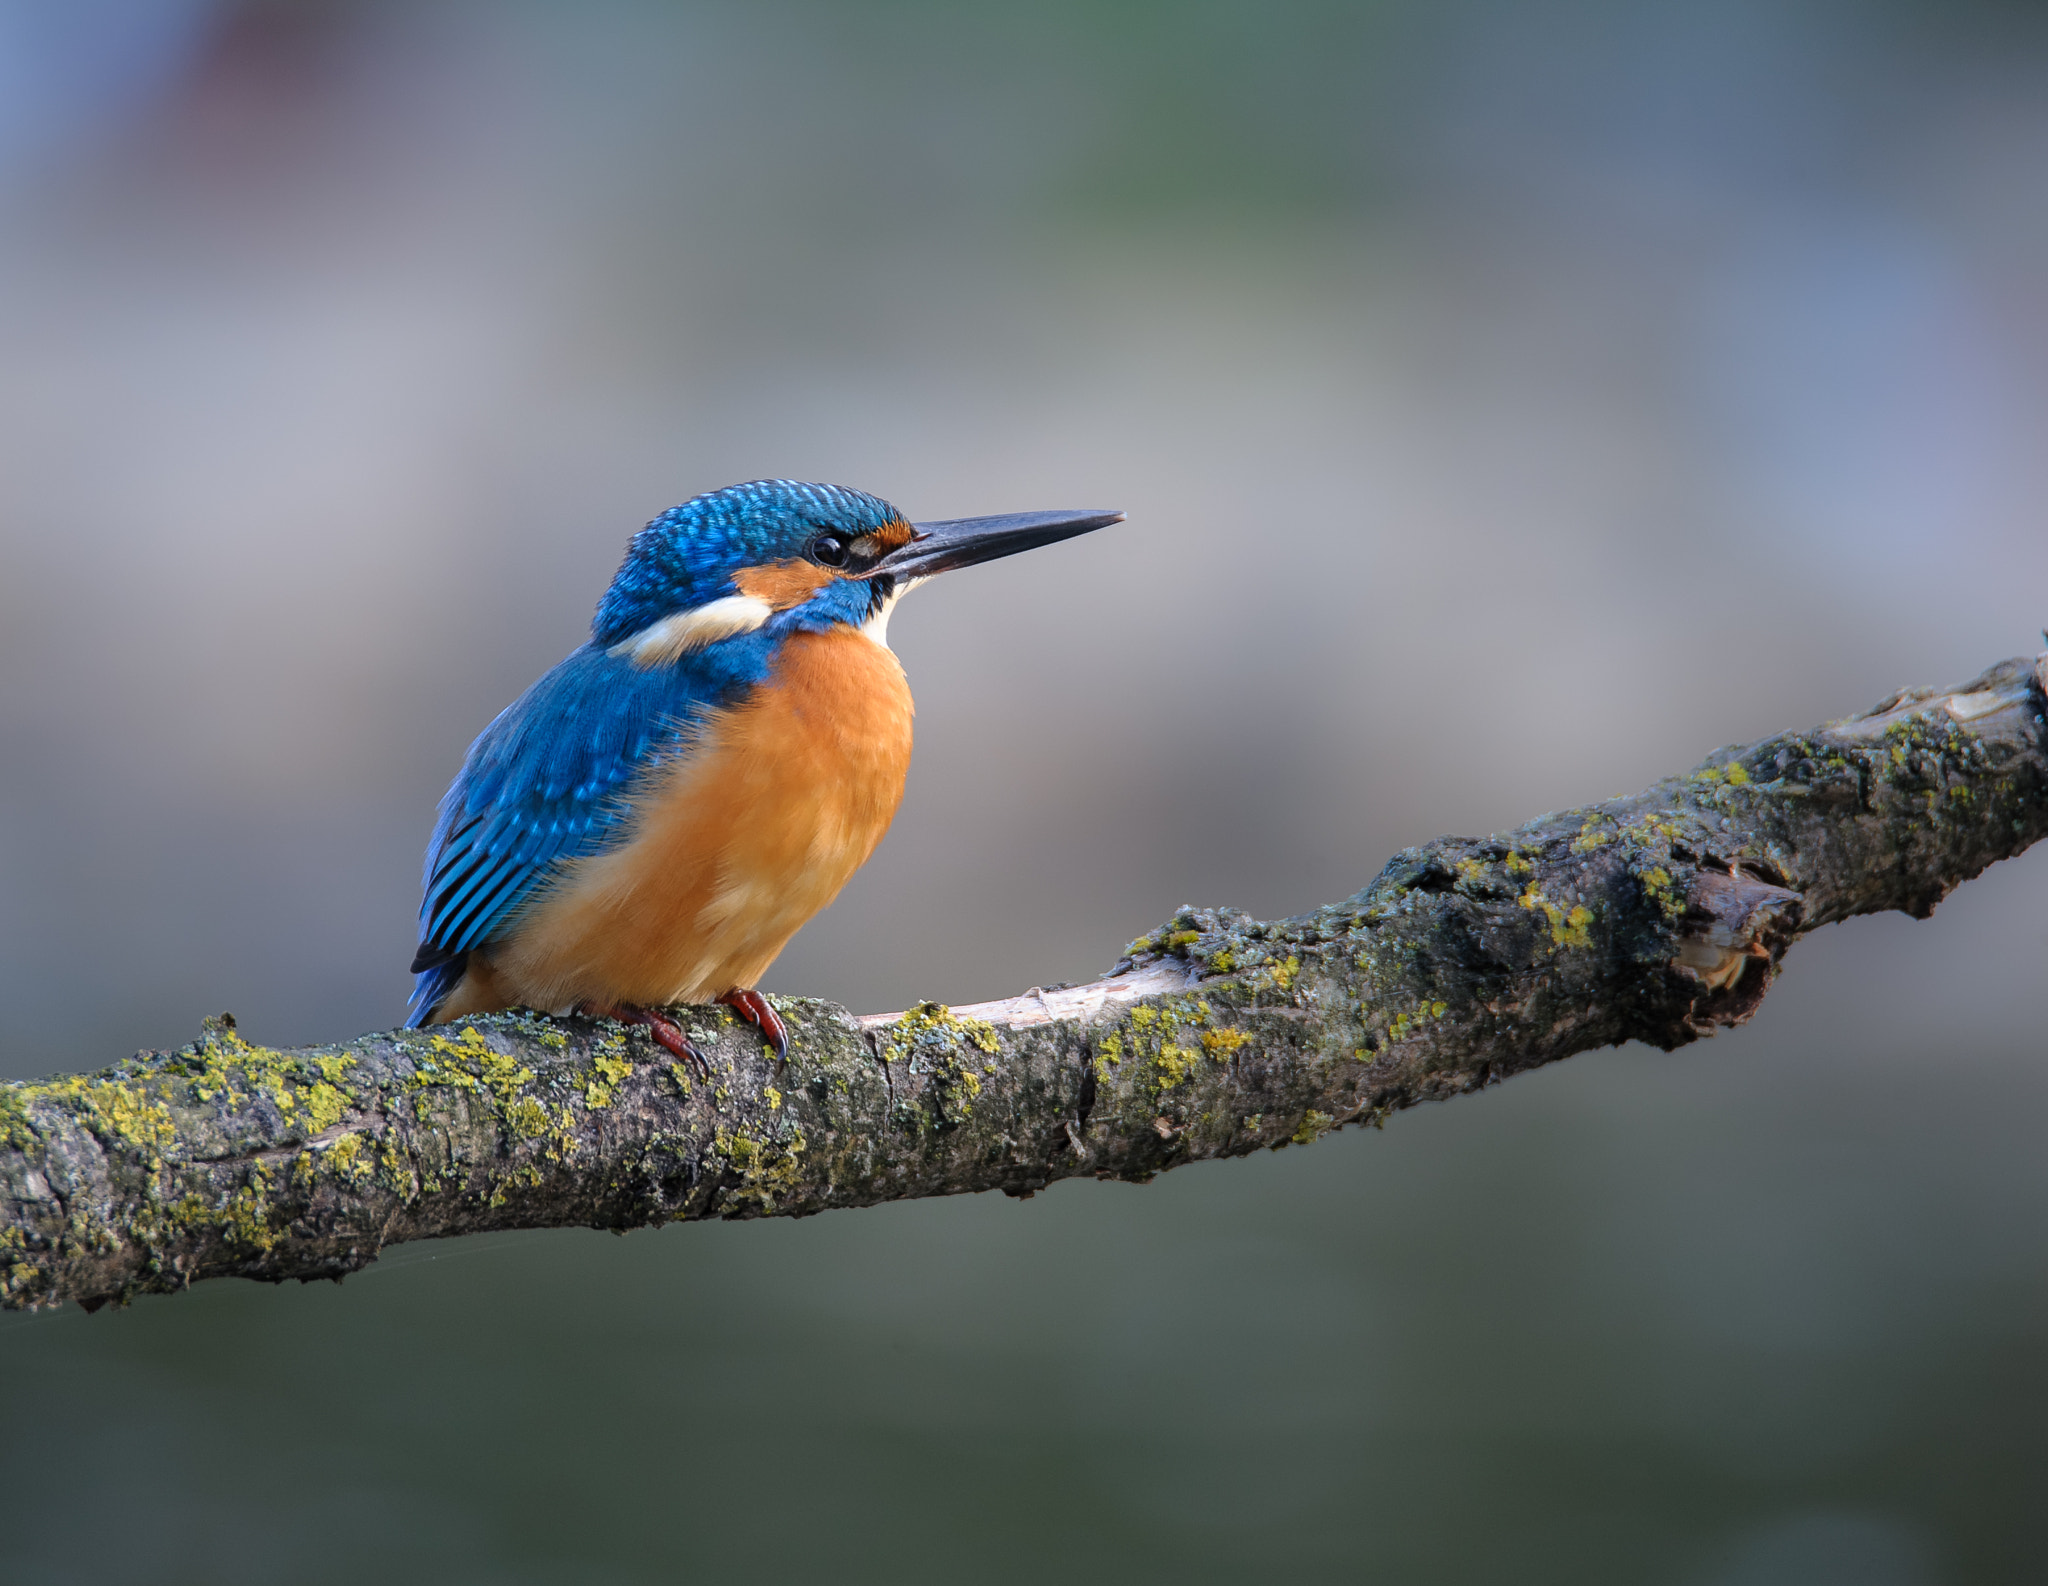 Nikon D3 sample photo. Another day...another kingfisher photography